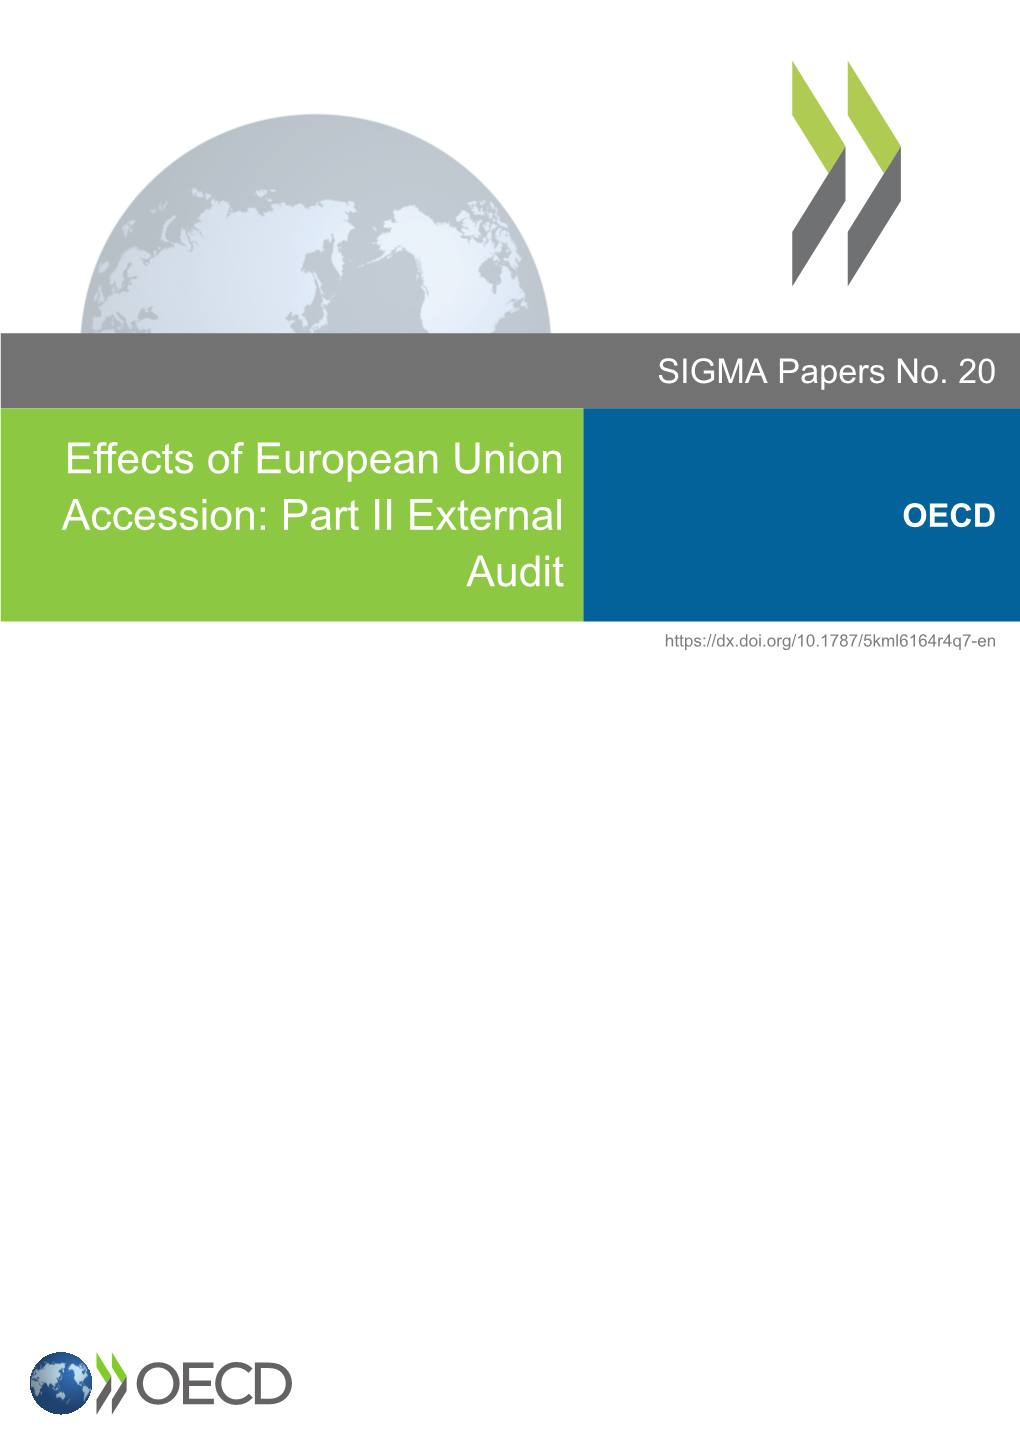 Effects of European Union Accession: Part II External OECD Audit